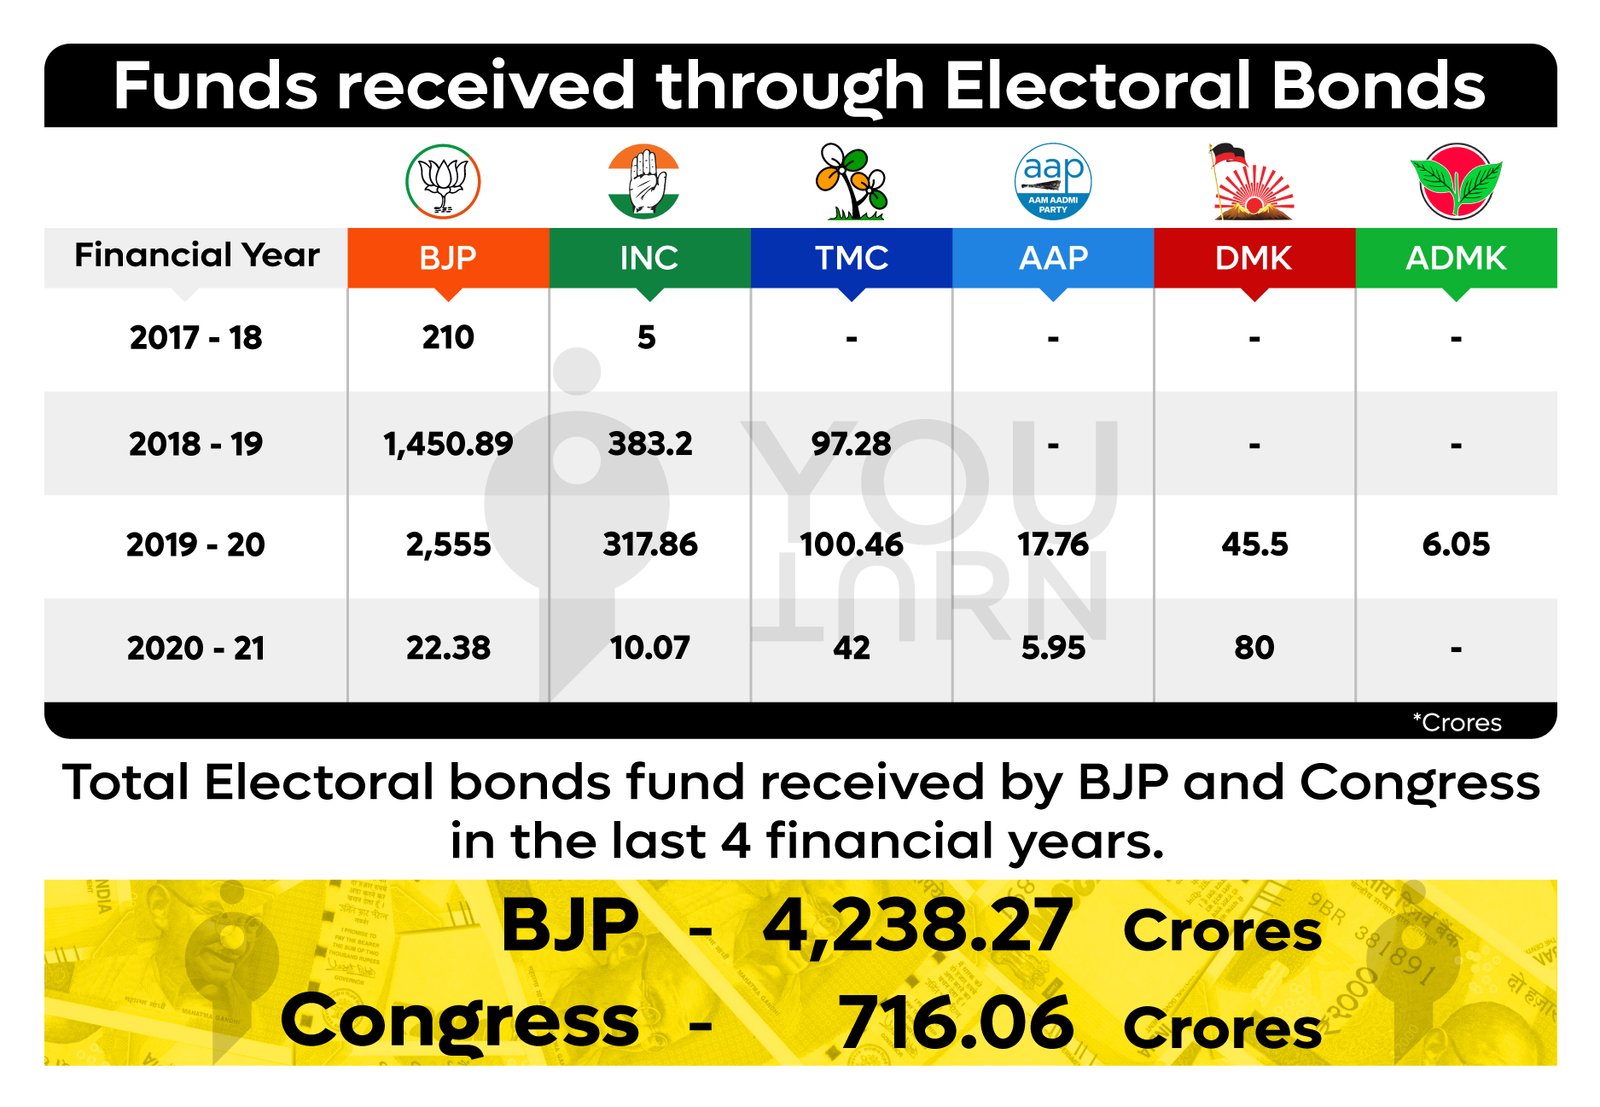 With over Rs.4,200 crores, BJP is the richest party. Are Electoral